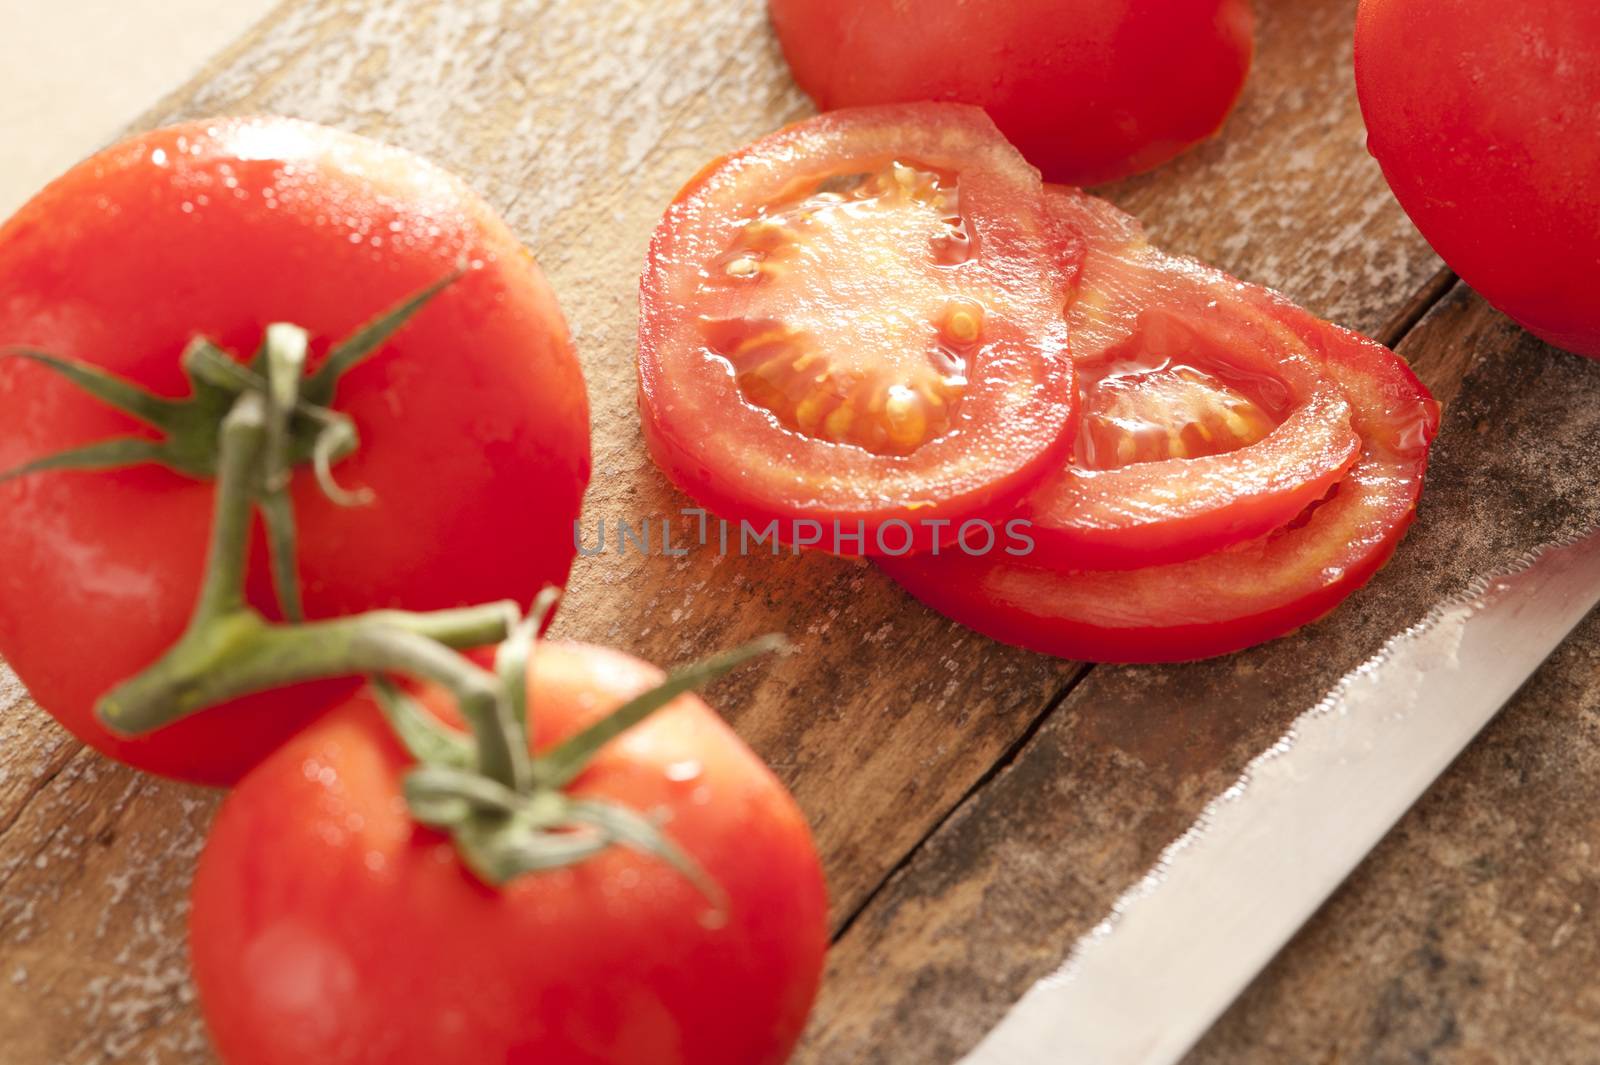 Freshly washed ripe red tomatoes with water droplets whole on the vine and sliced on a wooden cutting board with a kitchen knife